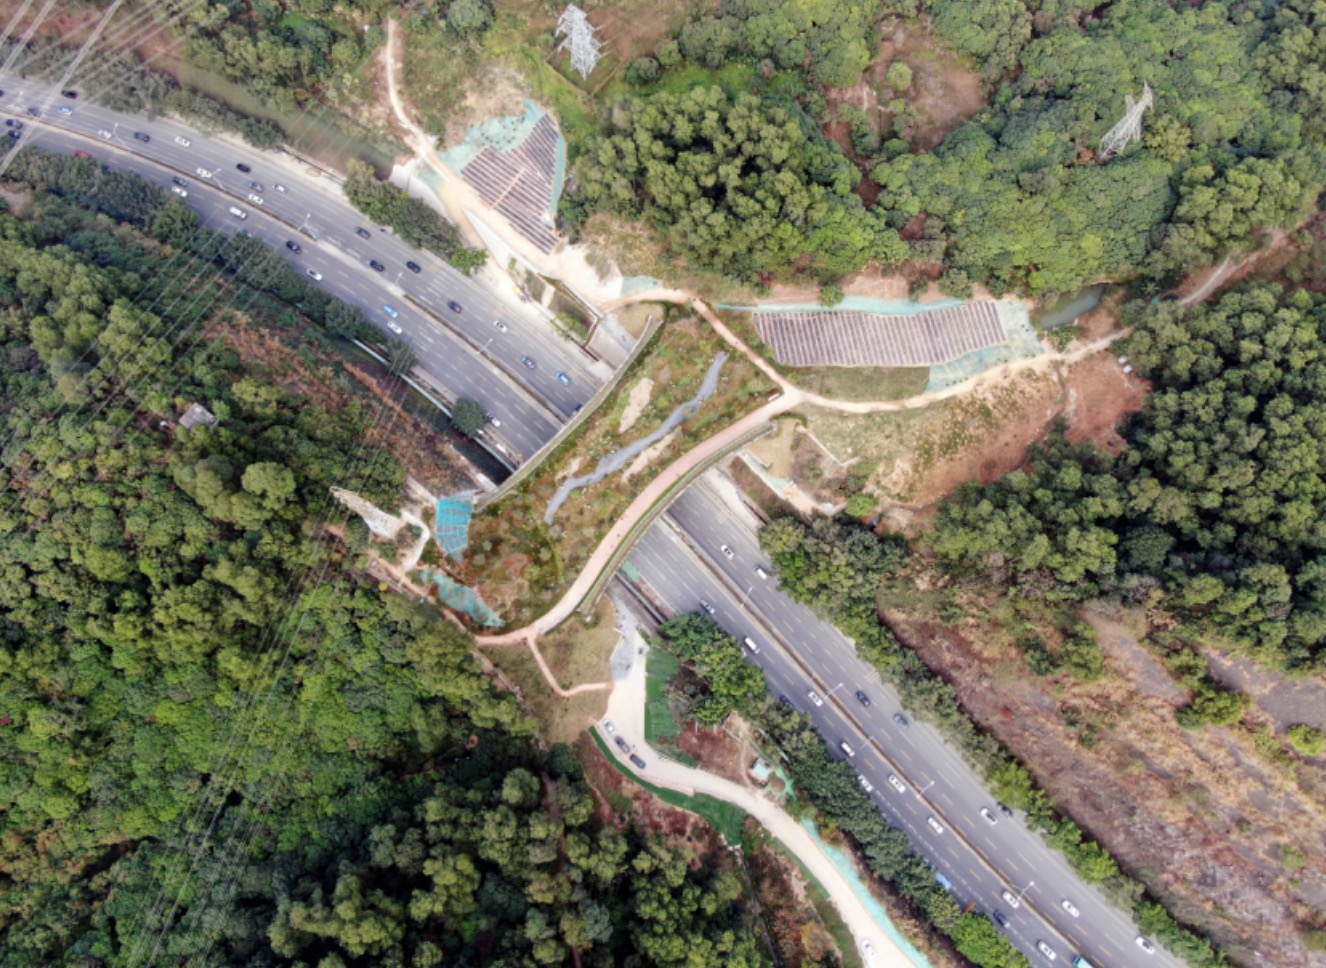 This undated file photo shows the Kunpeng Trail No. 1 Bridge connecting the Yinhu and Meilin mountains, Shenzhen, China. /CFP